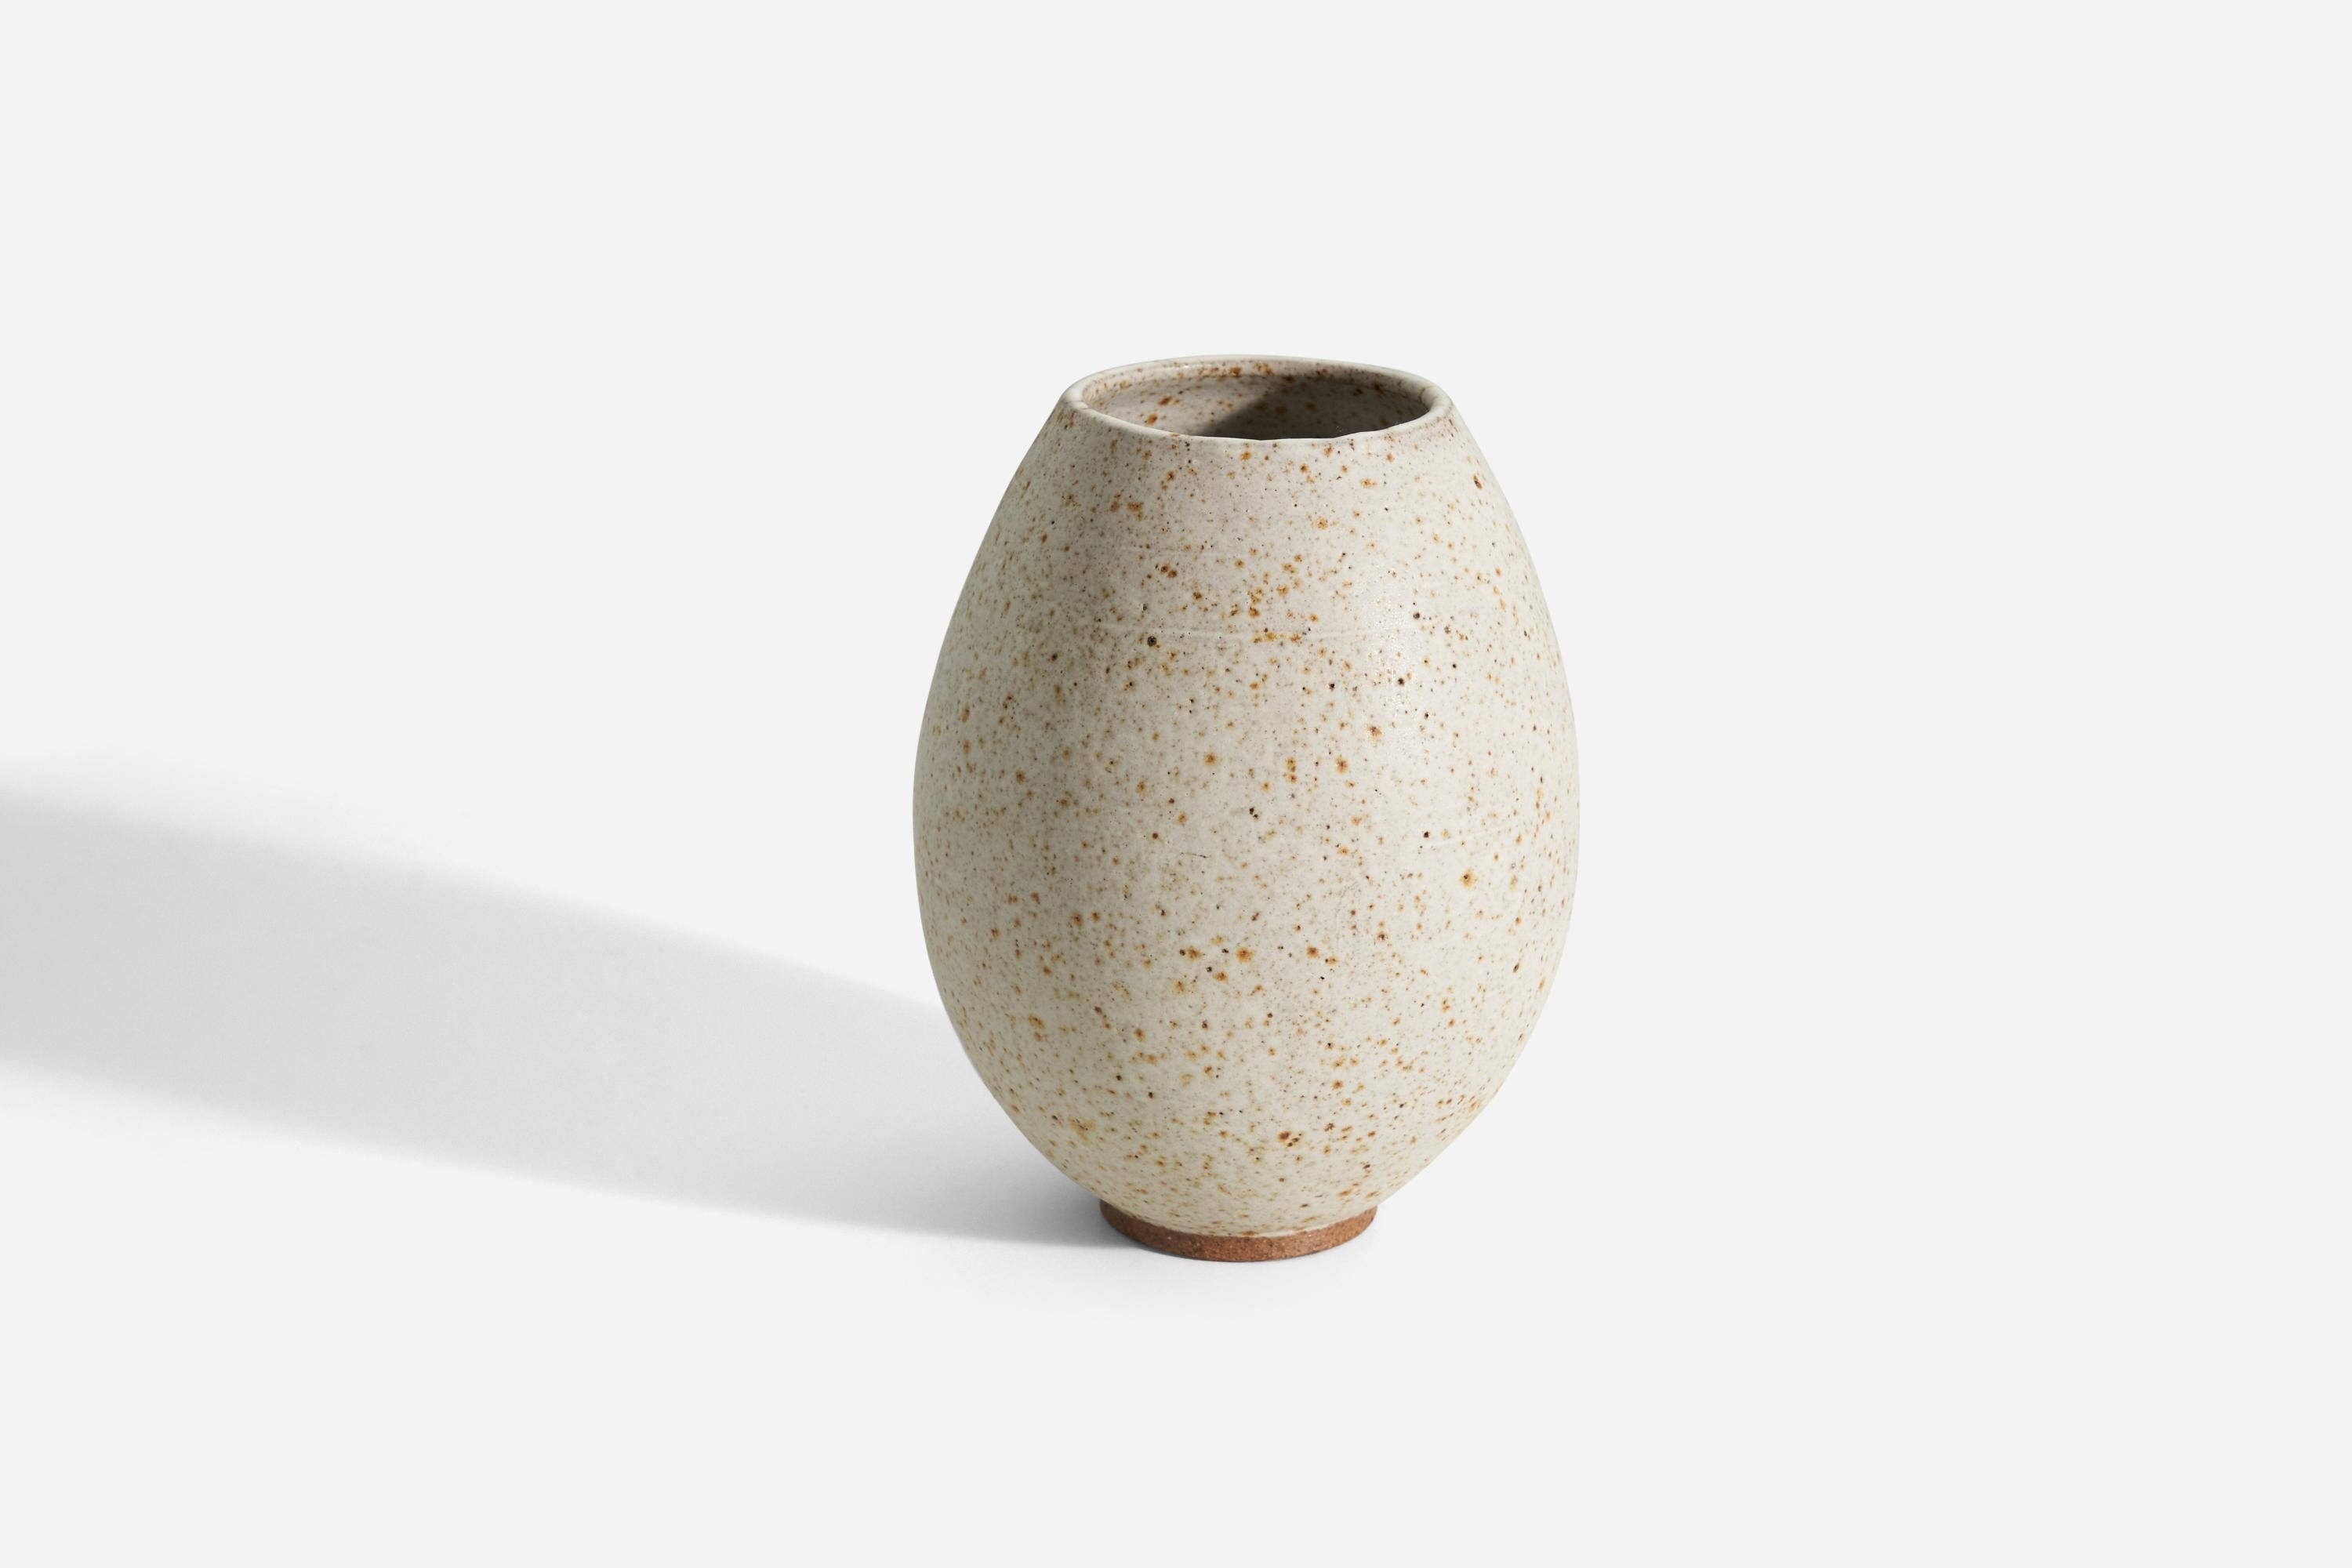 A vase, in semi-glazed stoneware, designed and produced by Kjell Boman, Lerhålan, Sweden, c. 1960s.